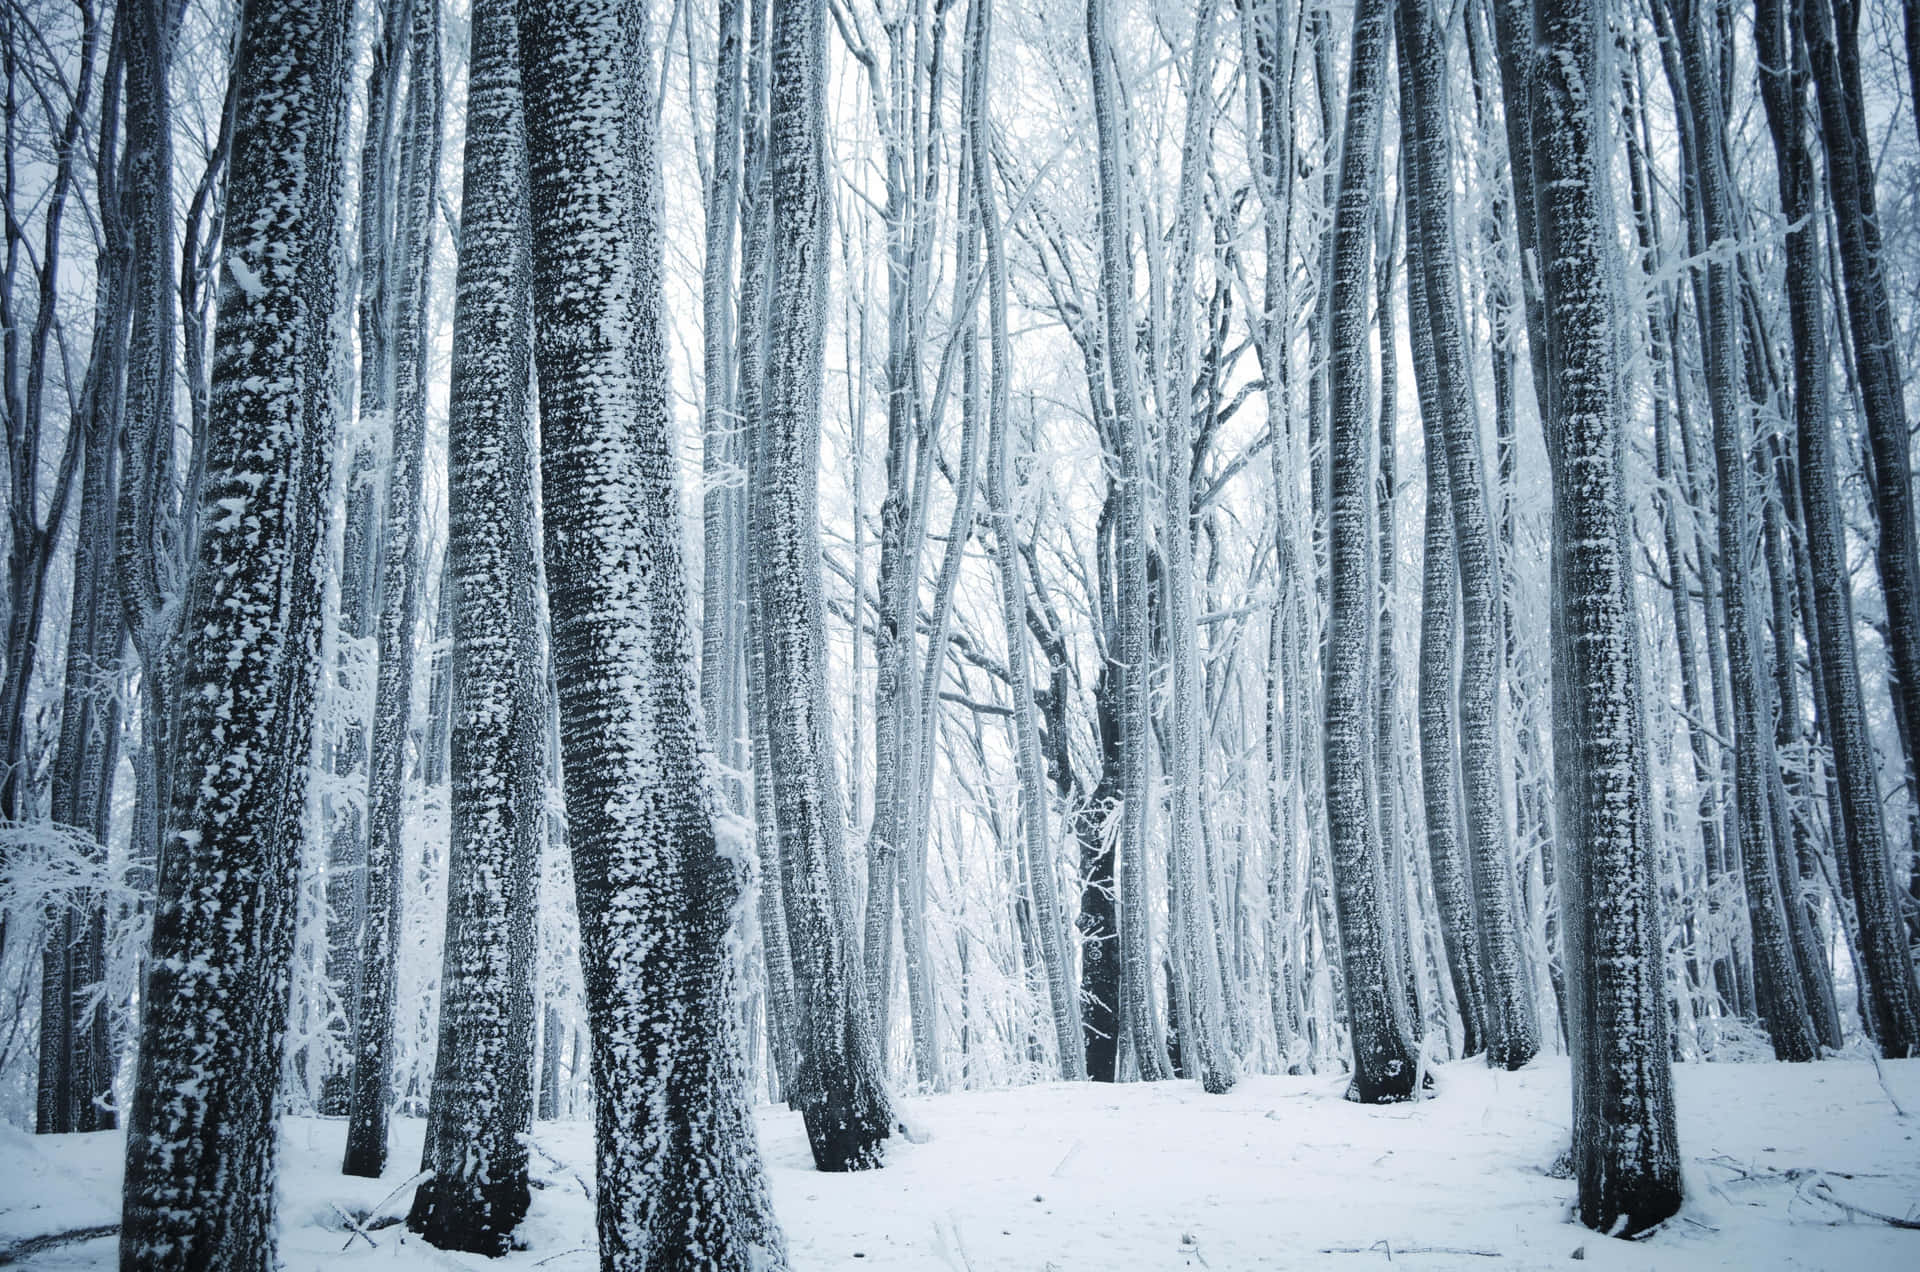 "Stay Naturally Connected in the Warmth of a Winter Forest"